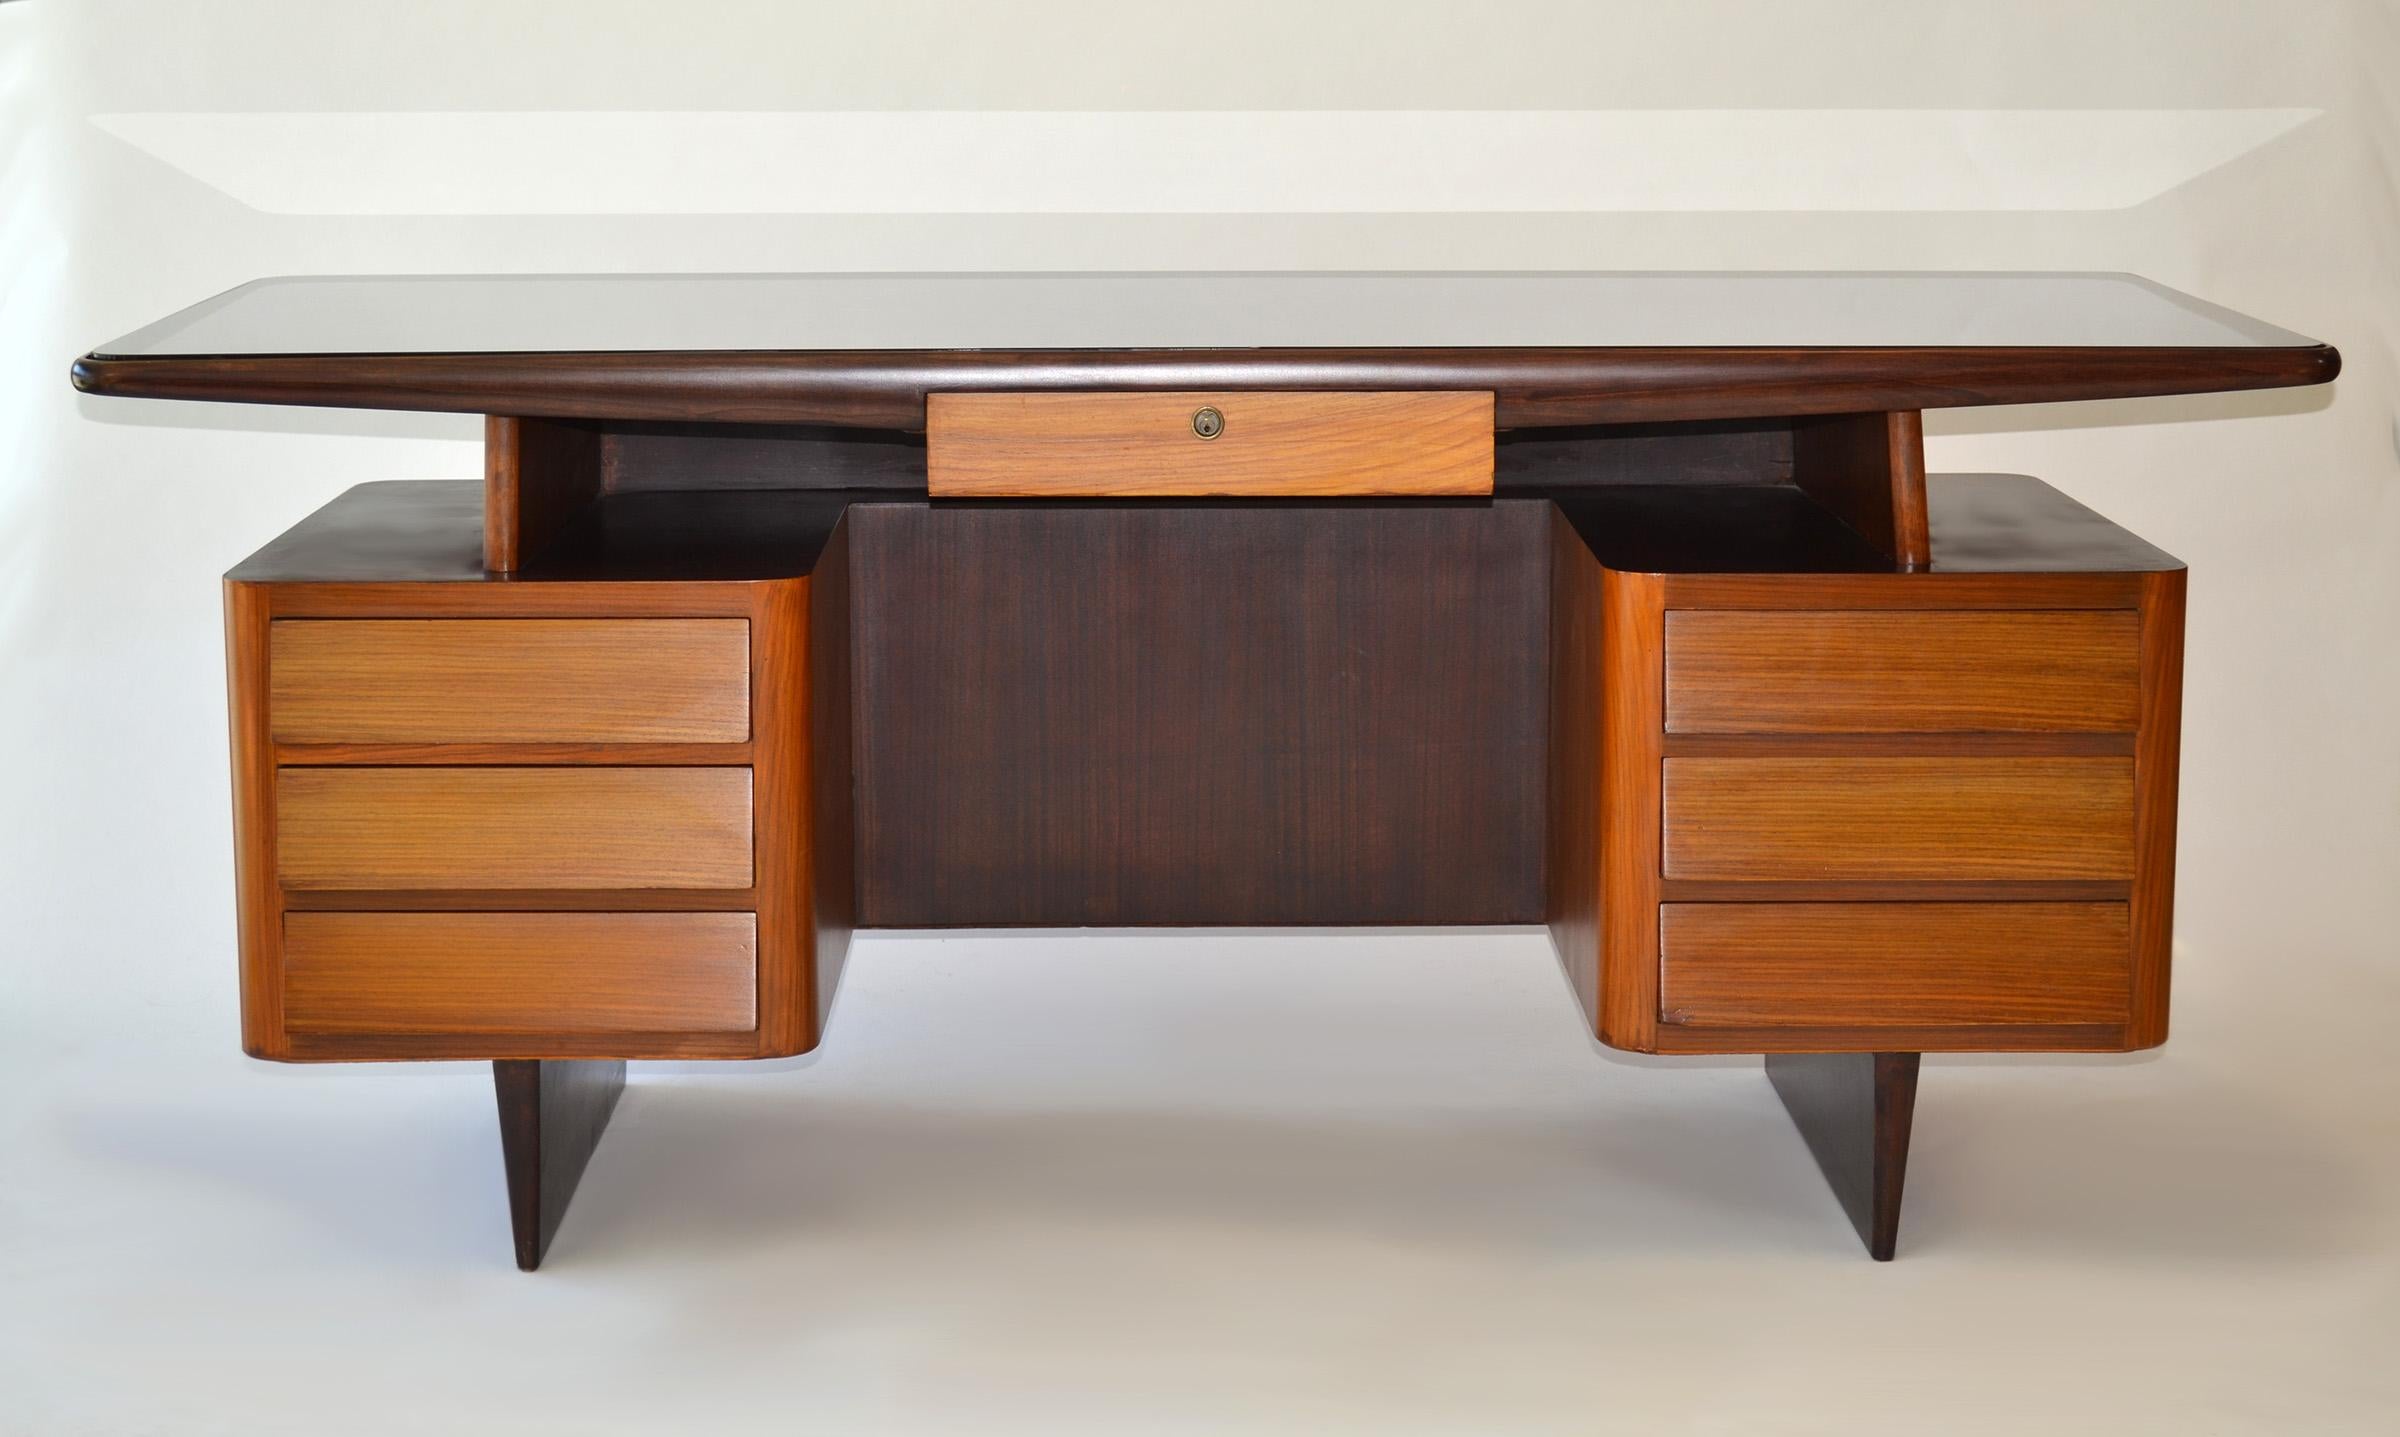 Italian Modern Desk attributed to Gio Ponti 1950s
Raised surface writing or executive desk with seven drawers (no key) in mahogany and rosewood veneer, black glass top (likely replaced), brass on Ponti-style fin base. Purchased in France.